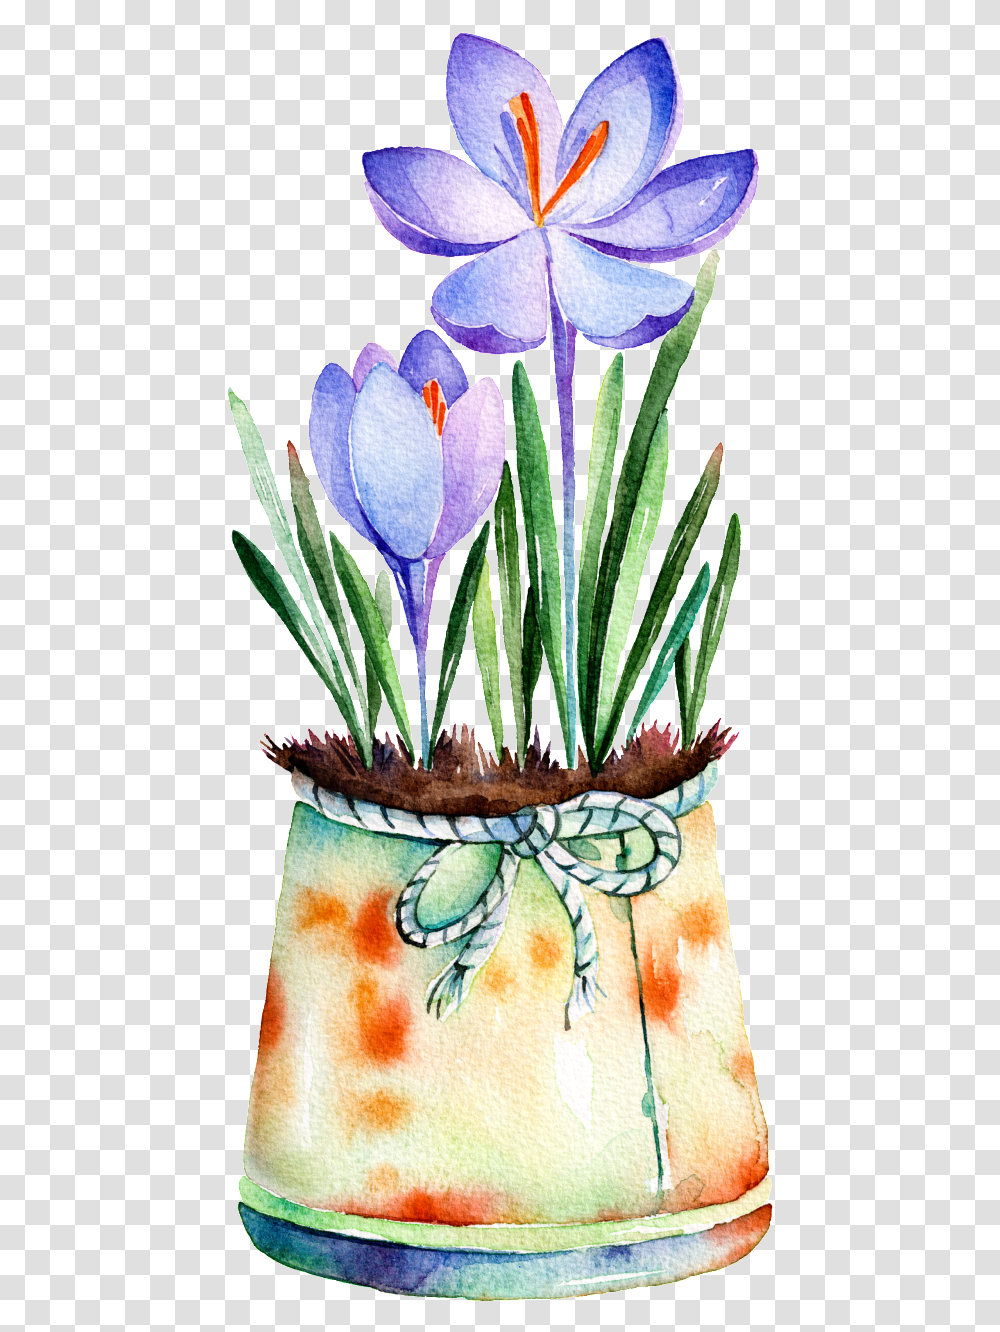 Download Purple Flower Potted Hand Painted Watercolor Flower In A Vase Drawing Watercolor, Plant, Blossom, Iris, Pineapple Transparent Png